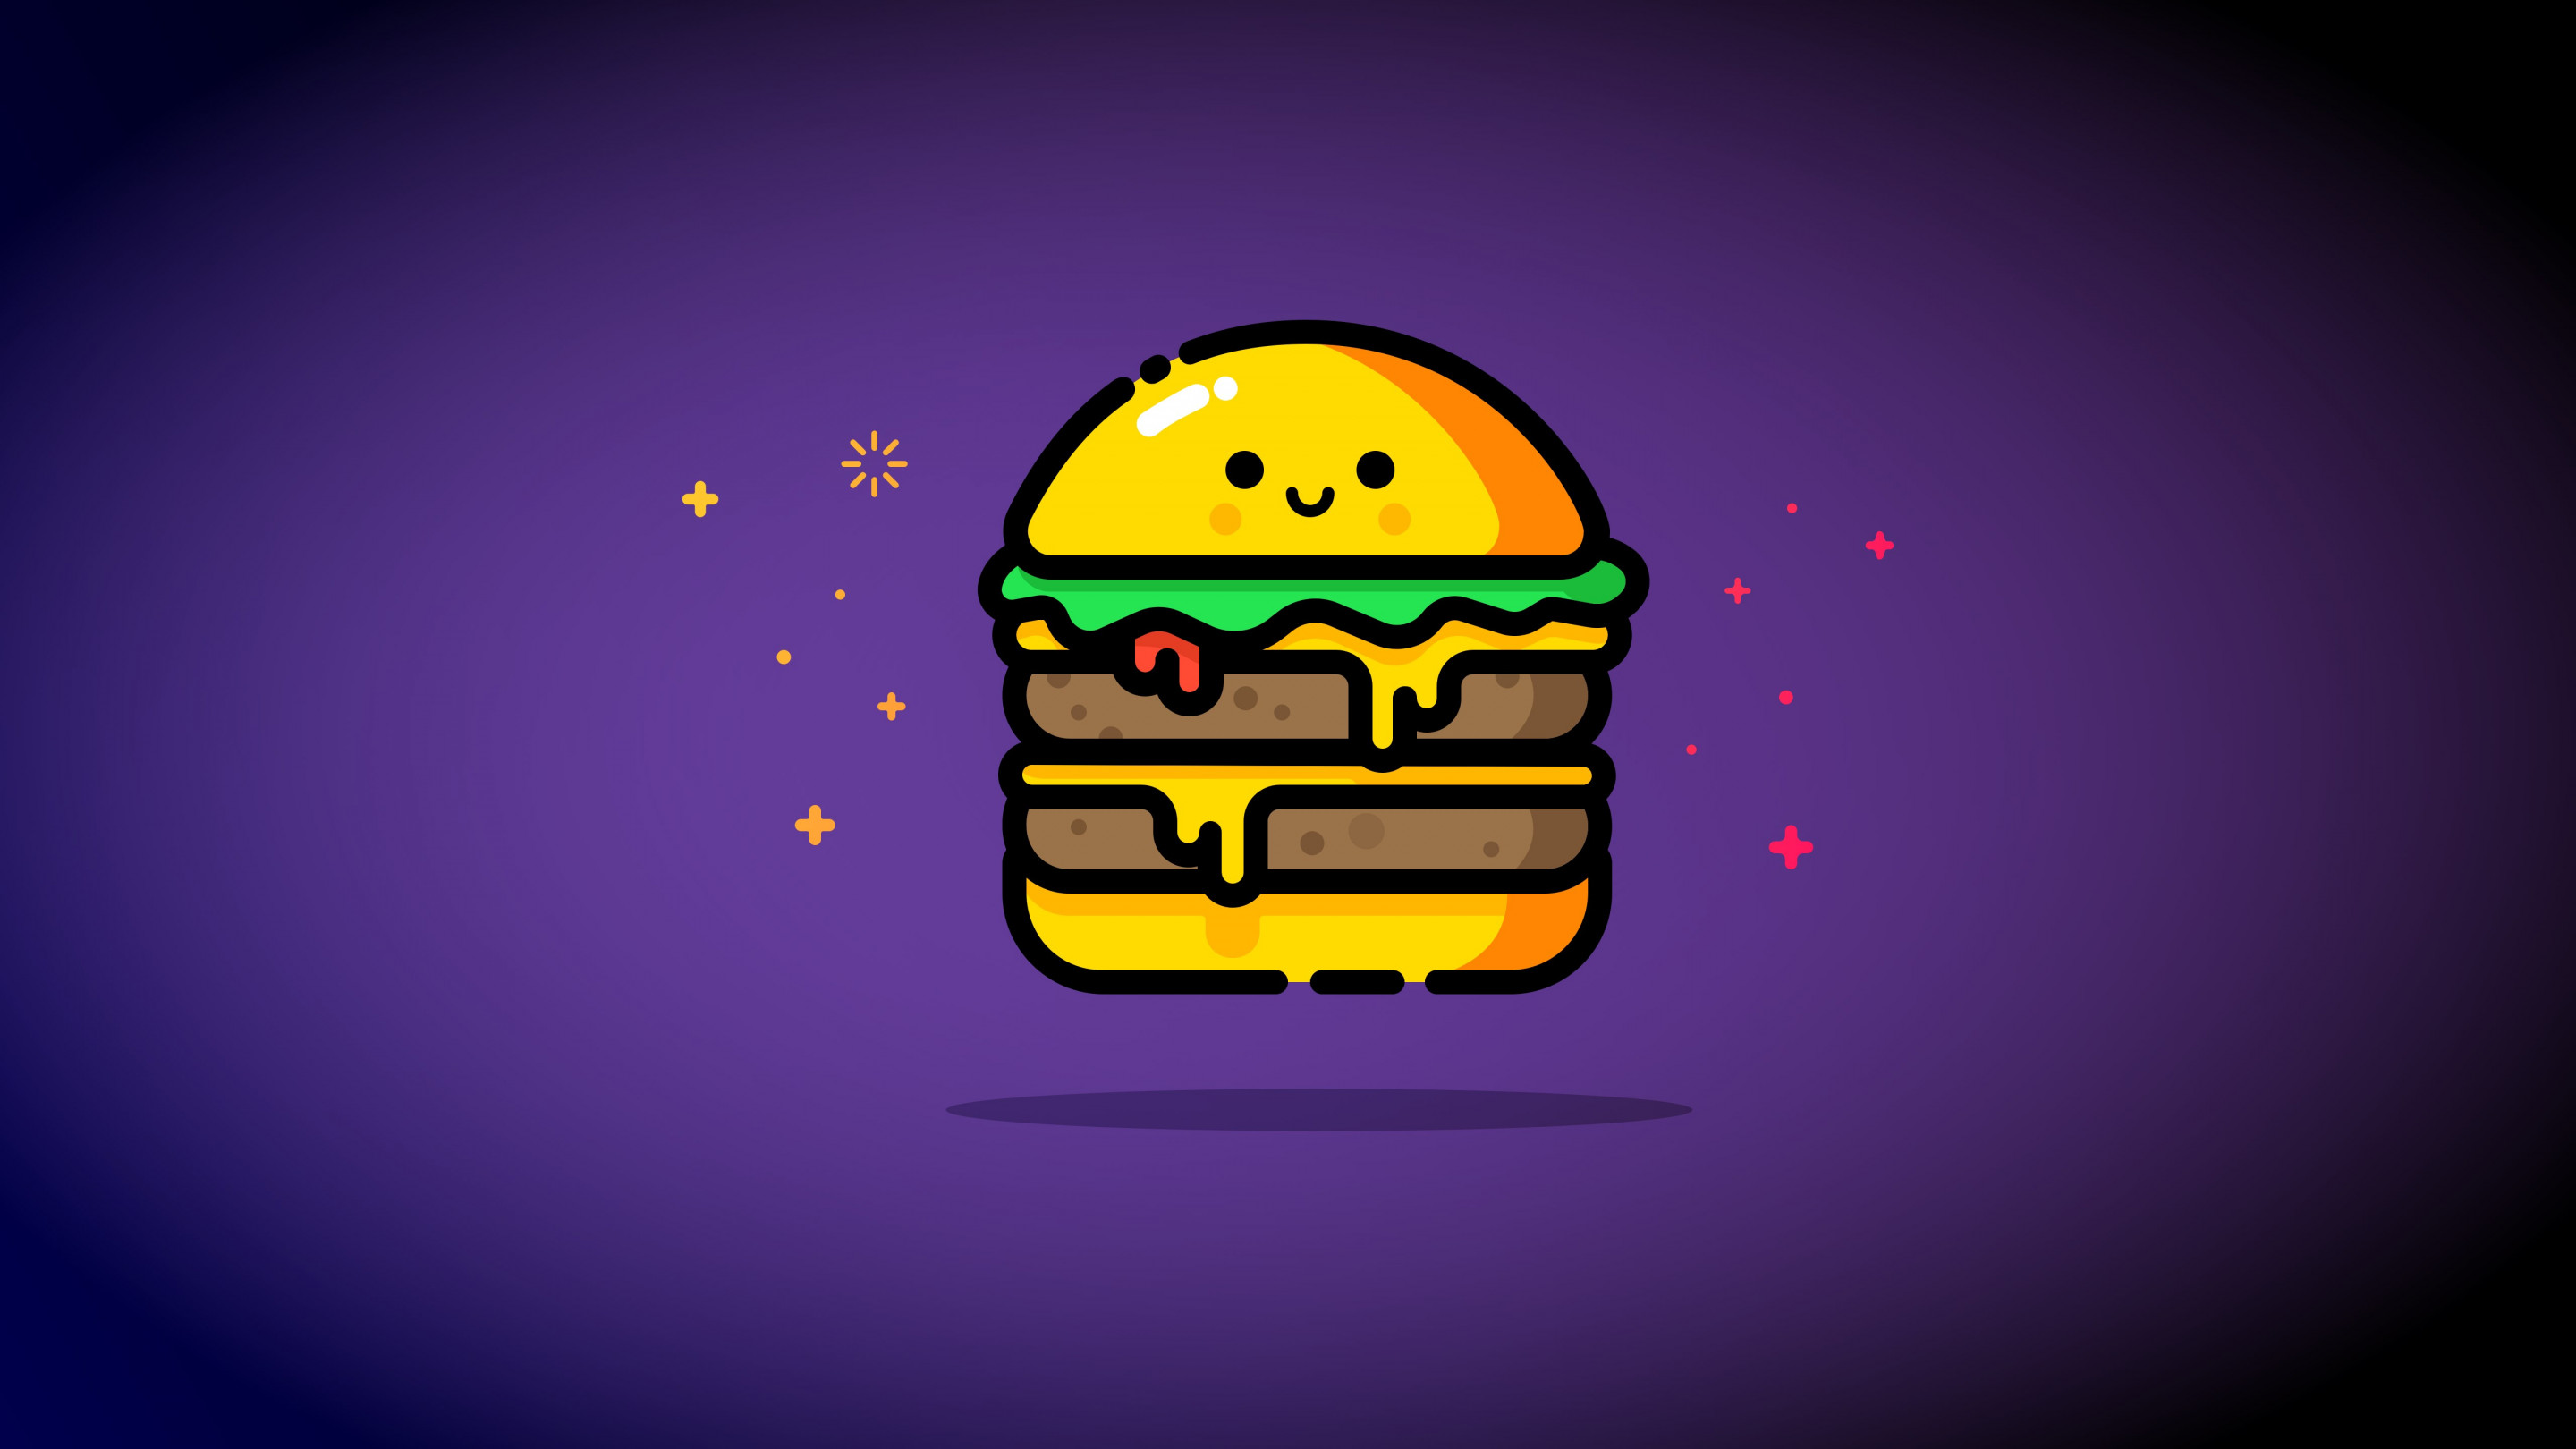 Double cheese wallpaper 2880x1620